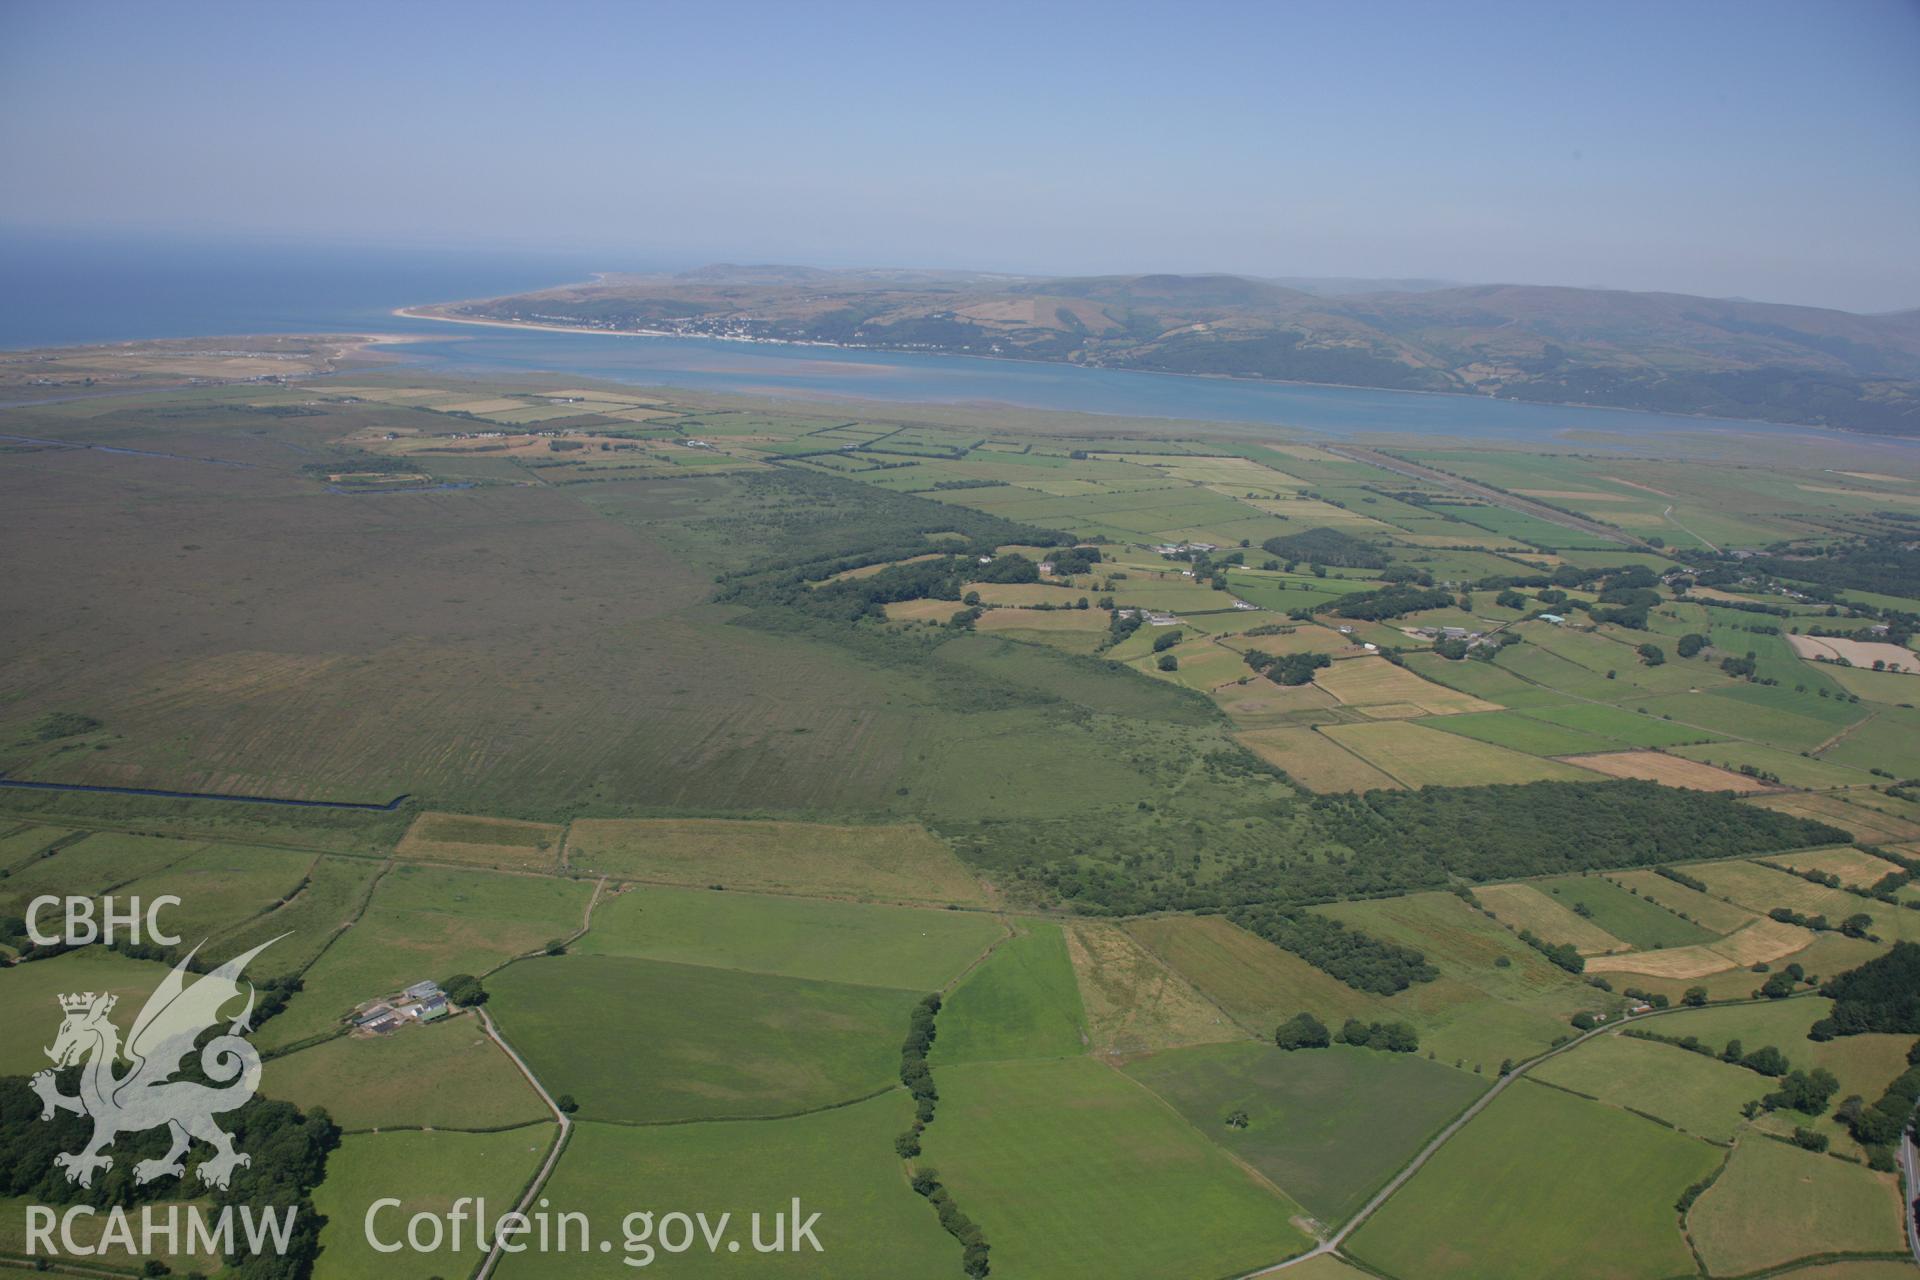 RCAHMW colour oblique aerial photograph of Cors Fochno Taken on 17 July 2006 by Toby Driver.